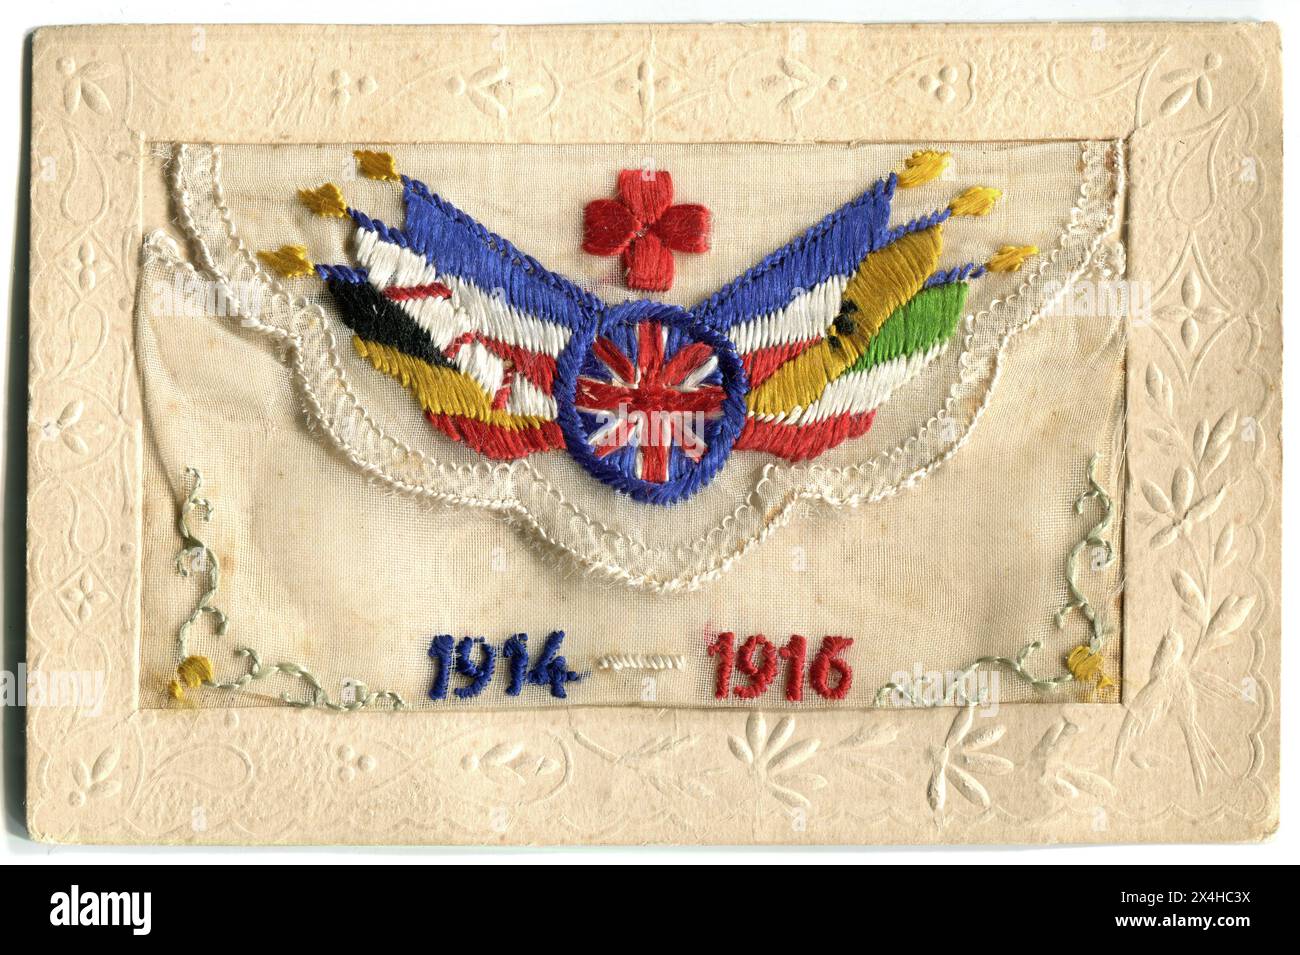 France. 1916 – An antique French-made silk postcard produced during the First World War as a souvenir for volunteers serving with the British Red Cross. The card is hand-embroidered with the Red Cross insignia above a roundel containing the Union Jack, surrounded by the flags of the other allied nations: Belgium, Japan, France, Serbia, Russia, and Italy. Below are the dates “1914-1916”. Stock Photo